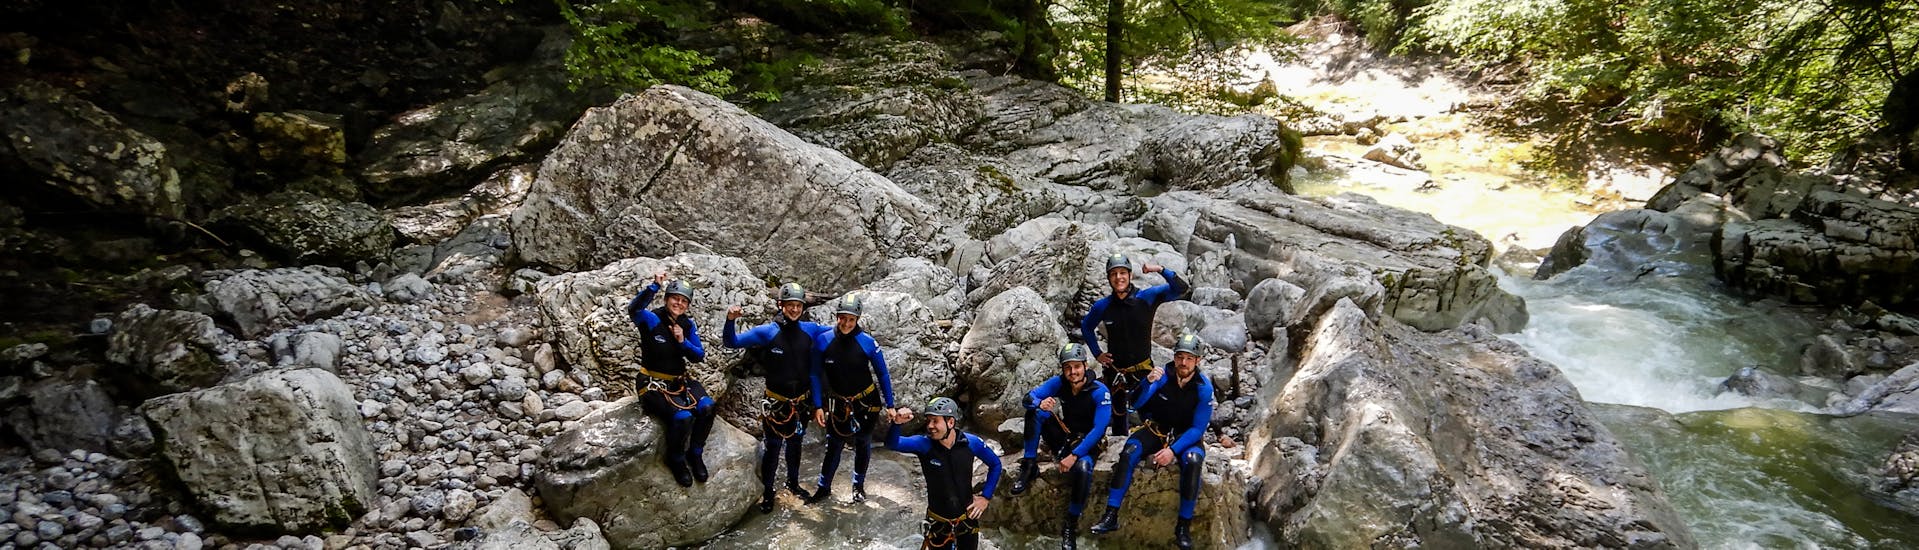 Canyoning facile a Erl.